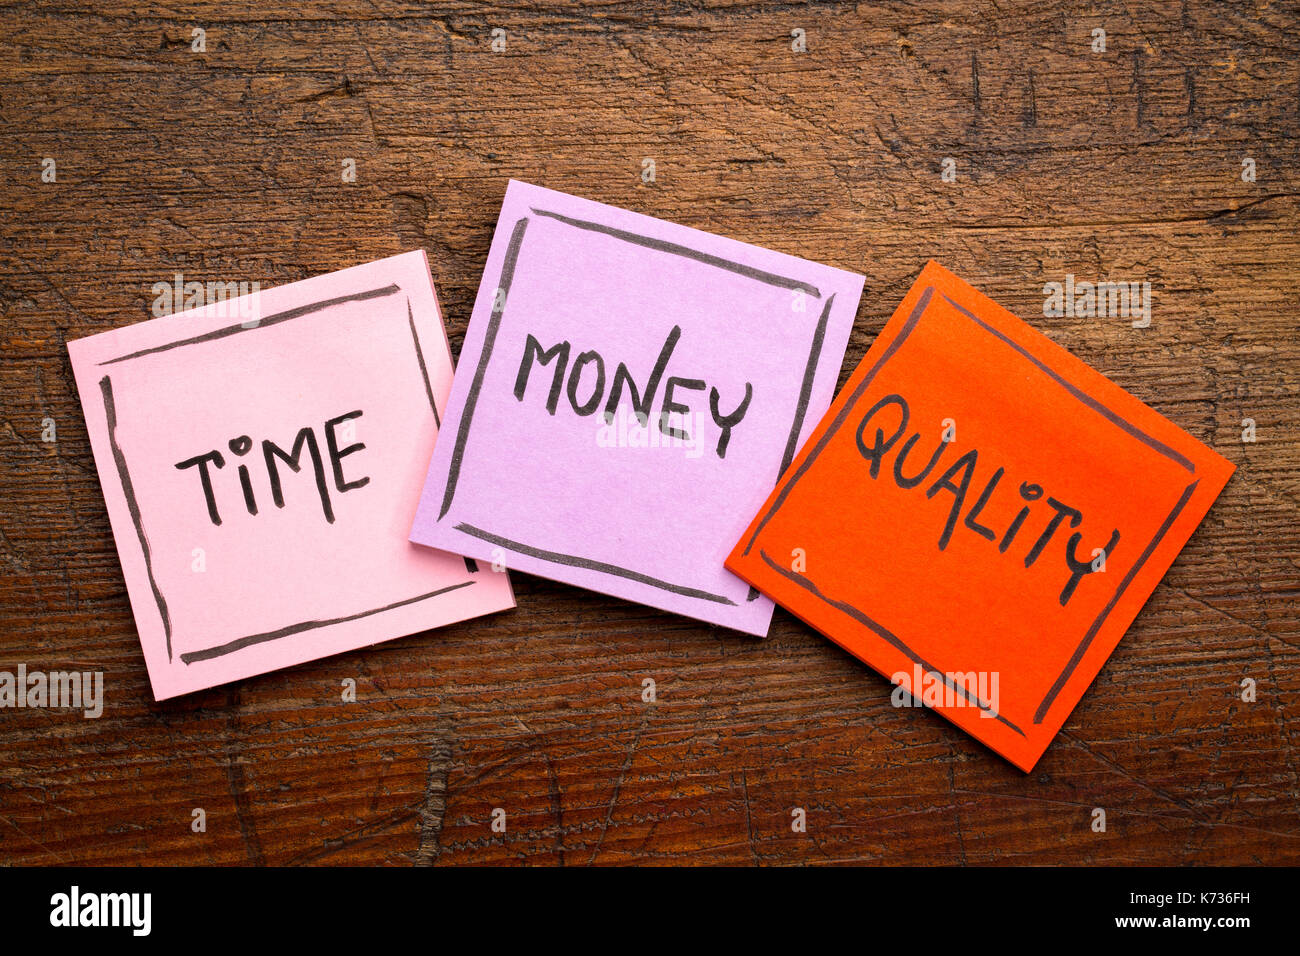 time, money, quality concept - handwriting in black ink on sticky notes against rustic wood Stock Photo